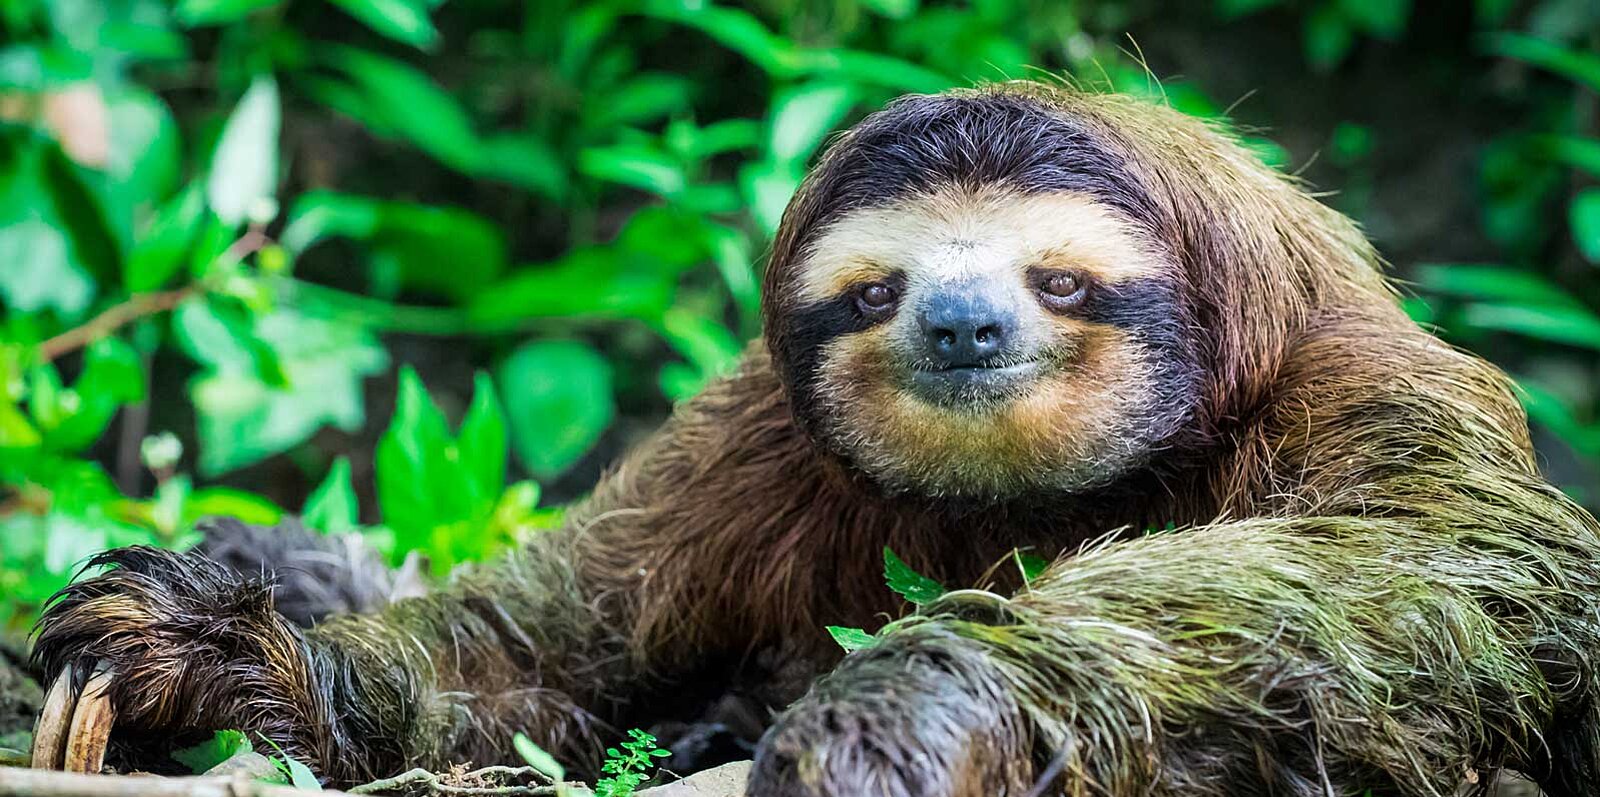 What is the fastest thing a sloth can do?